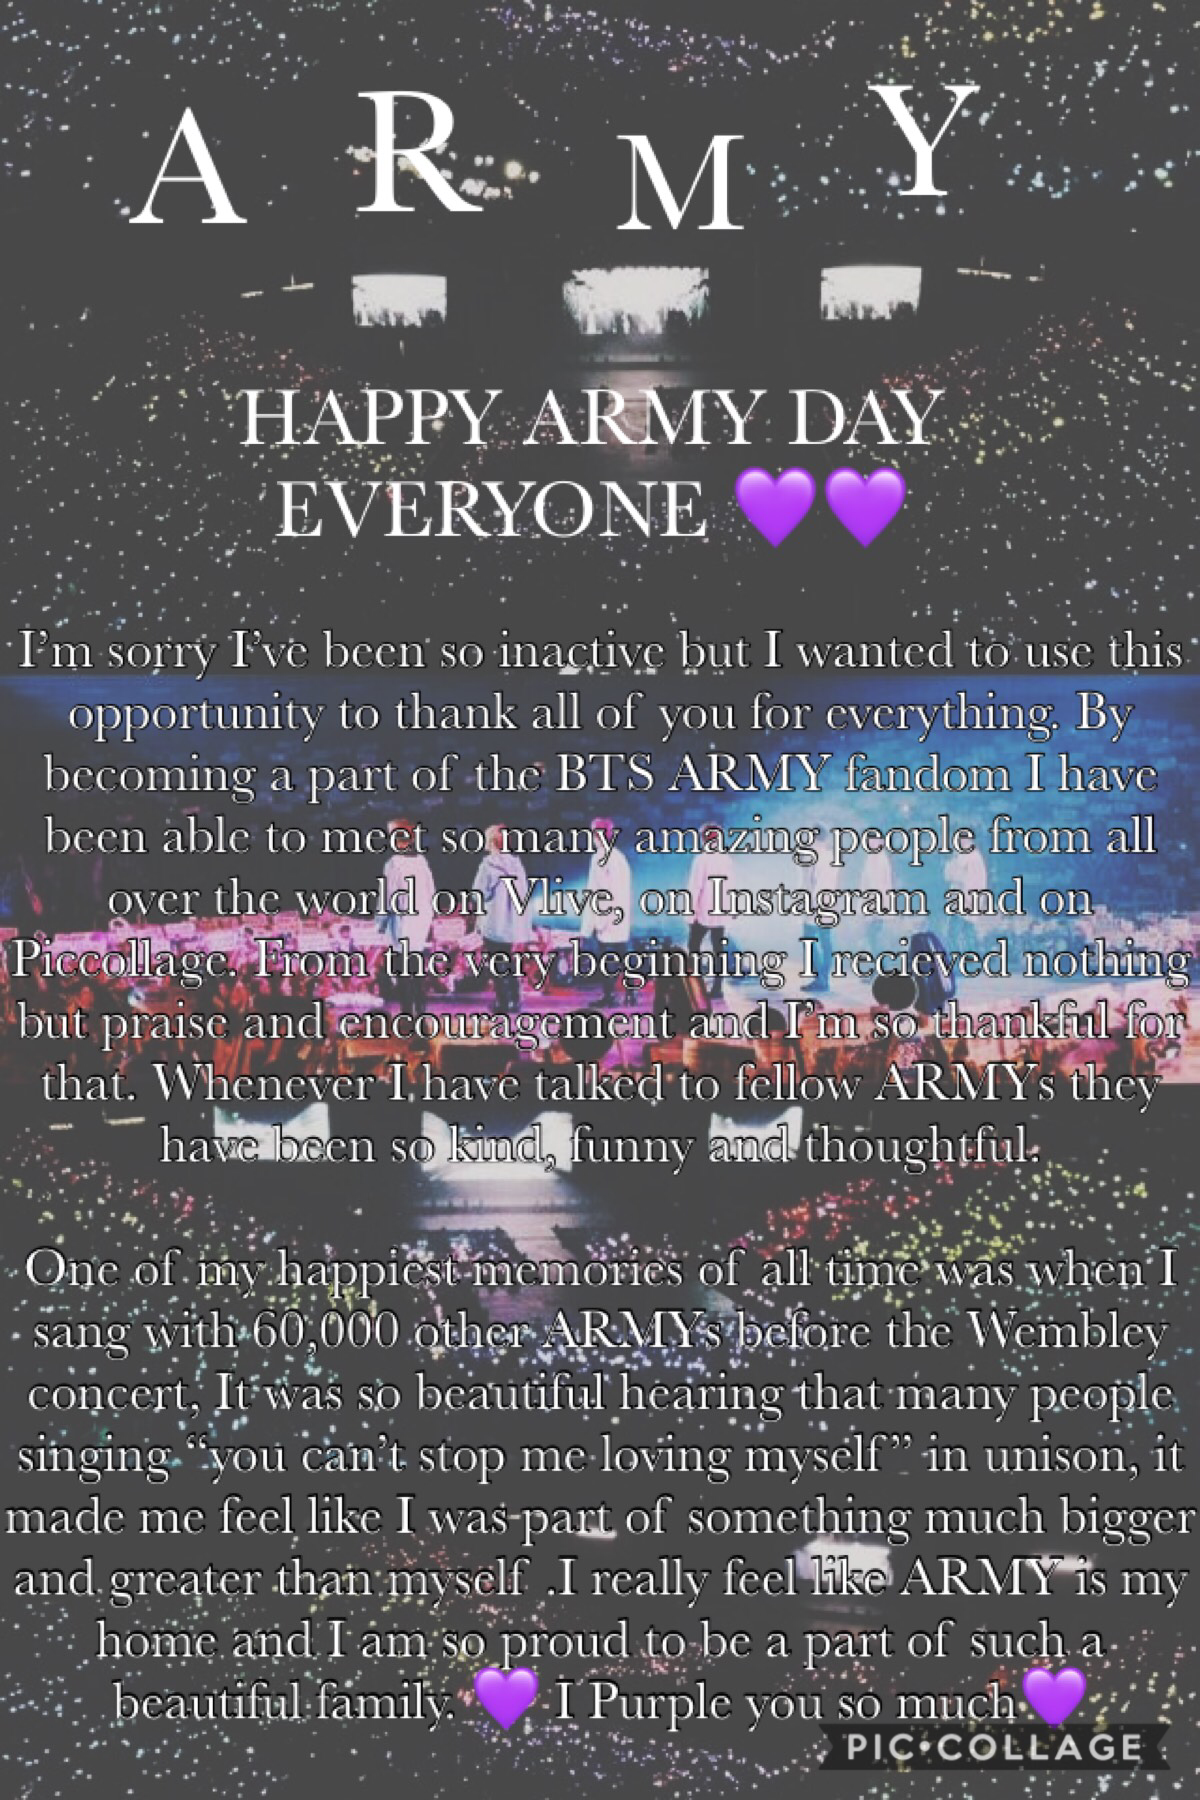 💜Happy ARMY day💜
-
-
Becoming an ARMY was probably the best decision I ever made, I Purple you all 💜